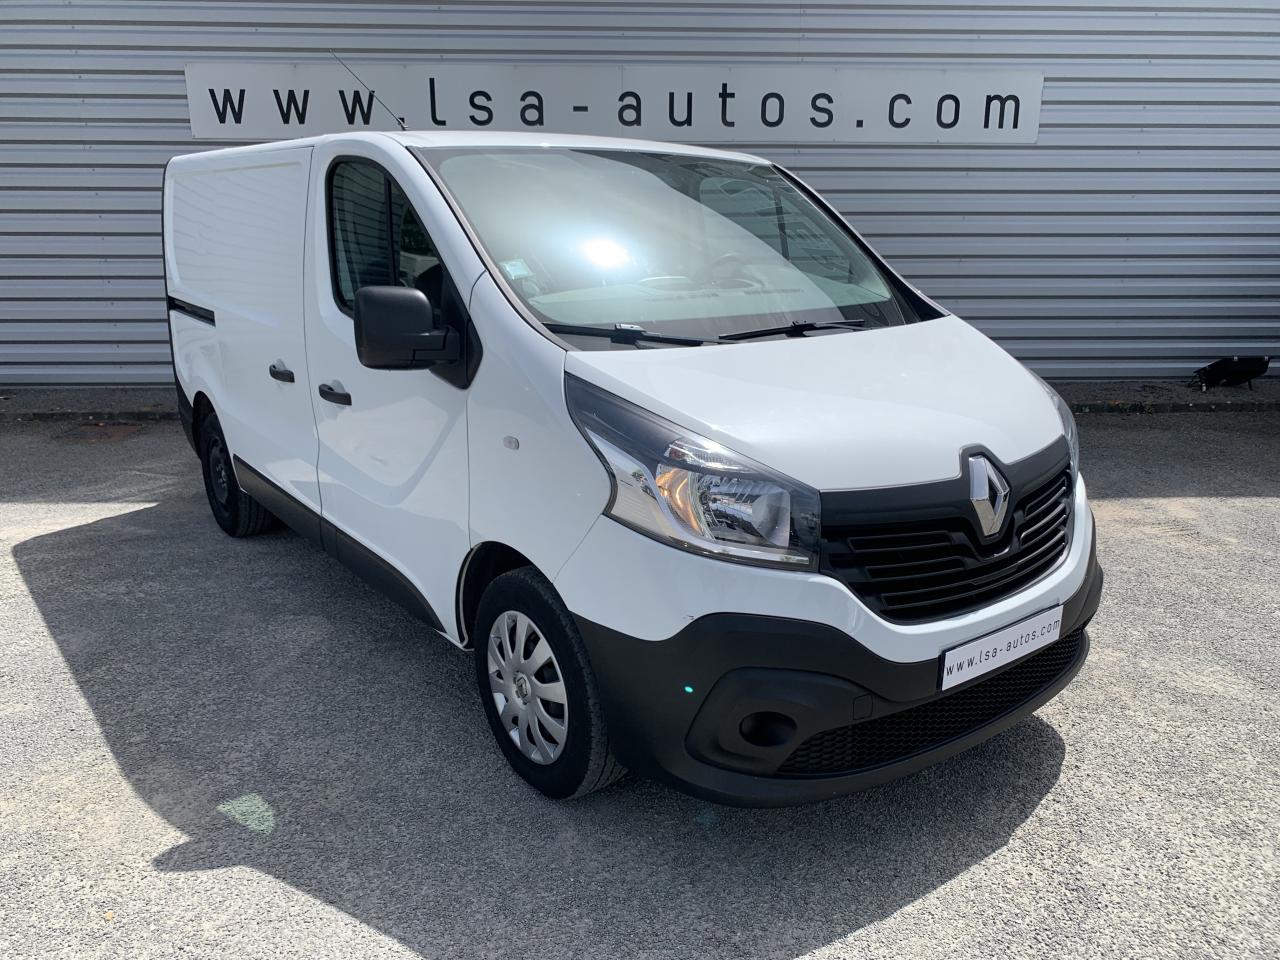 Annonce Renault trafic fourgon extra l1h1 1000kg 2.5 dci 150 fap 2007  DIESEL occasion - Carcassonne - Aude 11